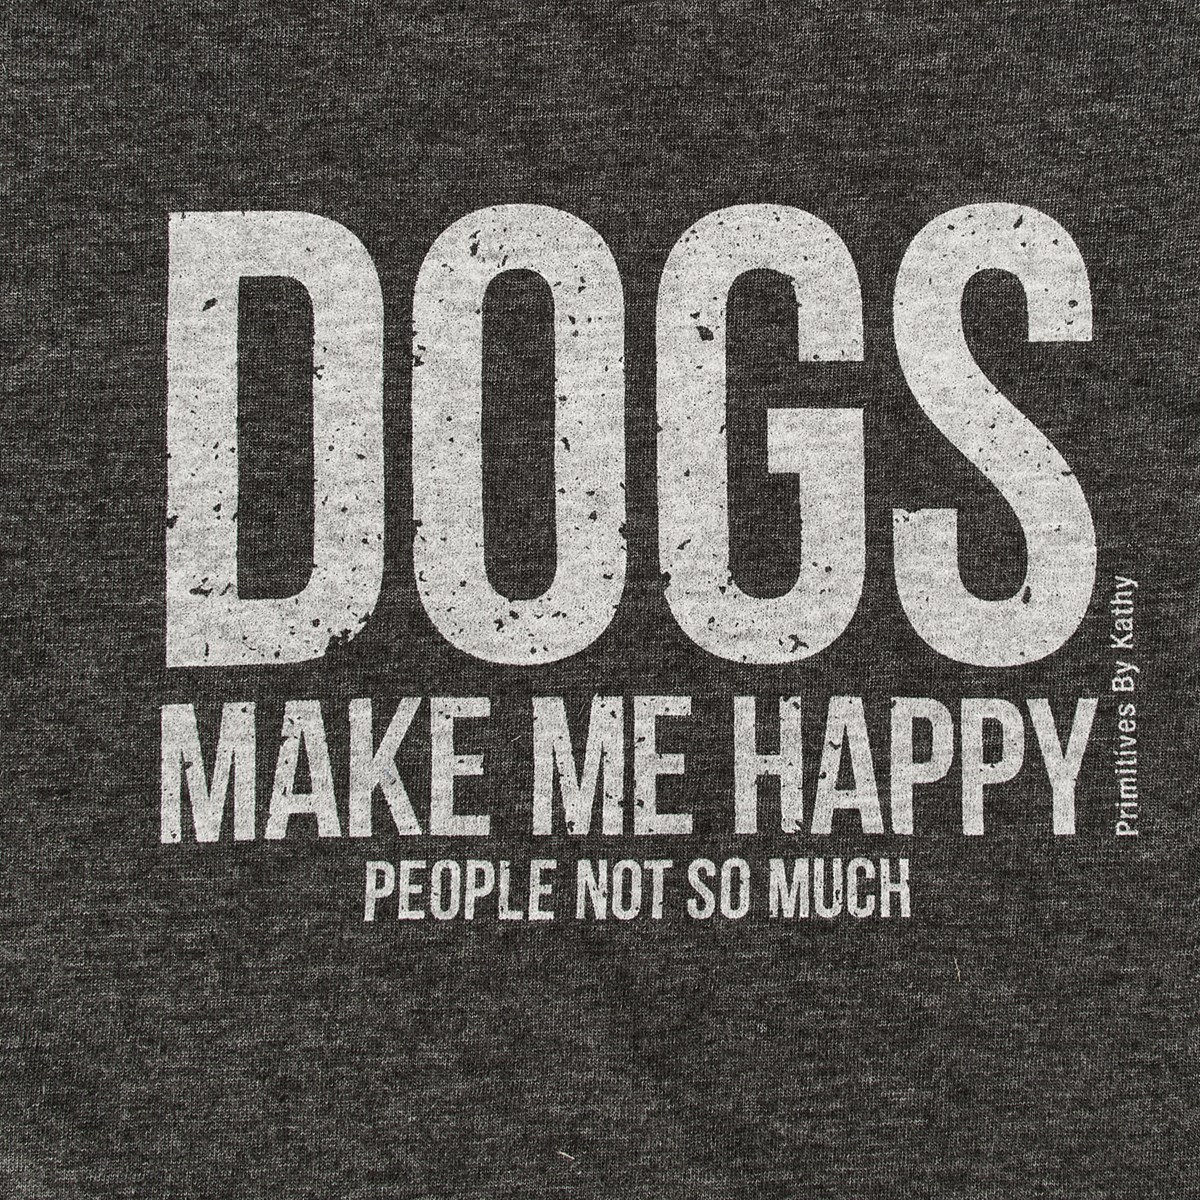 Dogs Make Me Happy Large T-Shirt - Polyester, Cotton